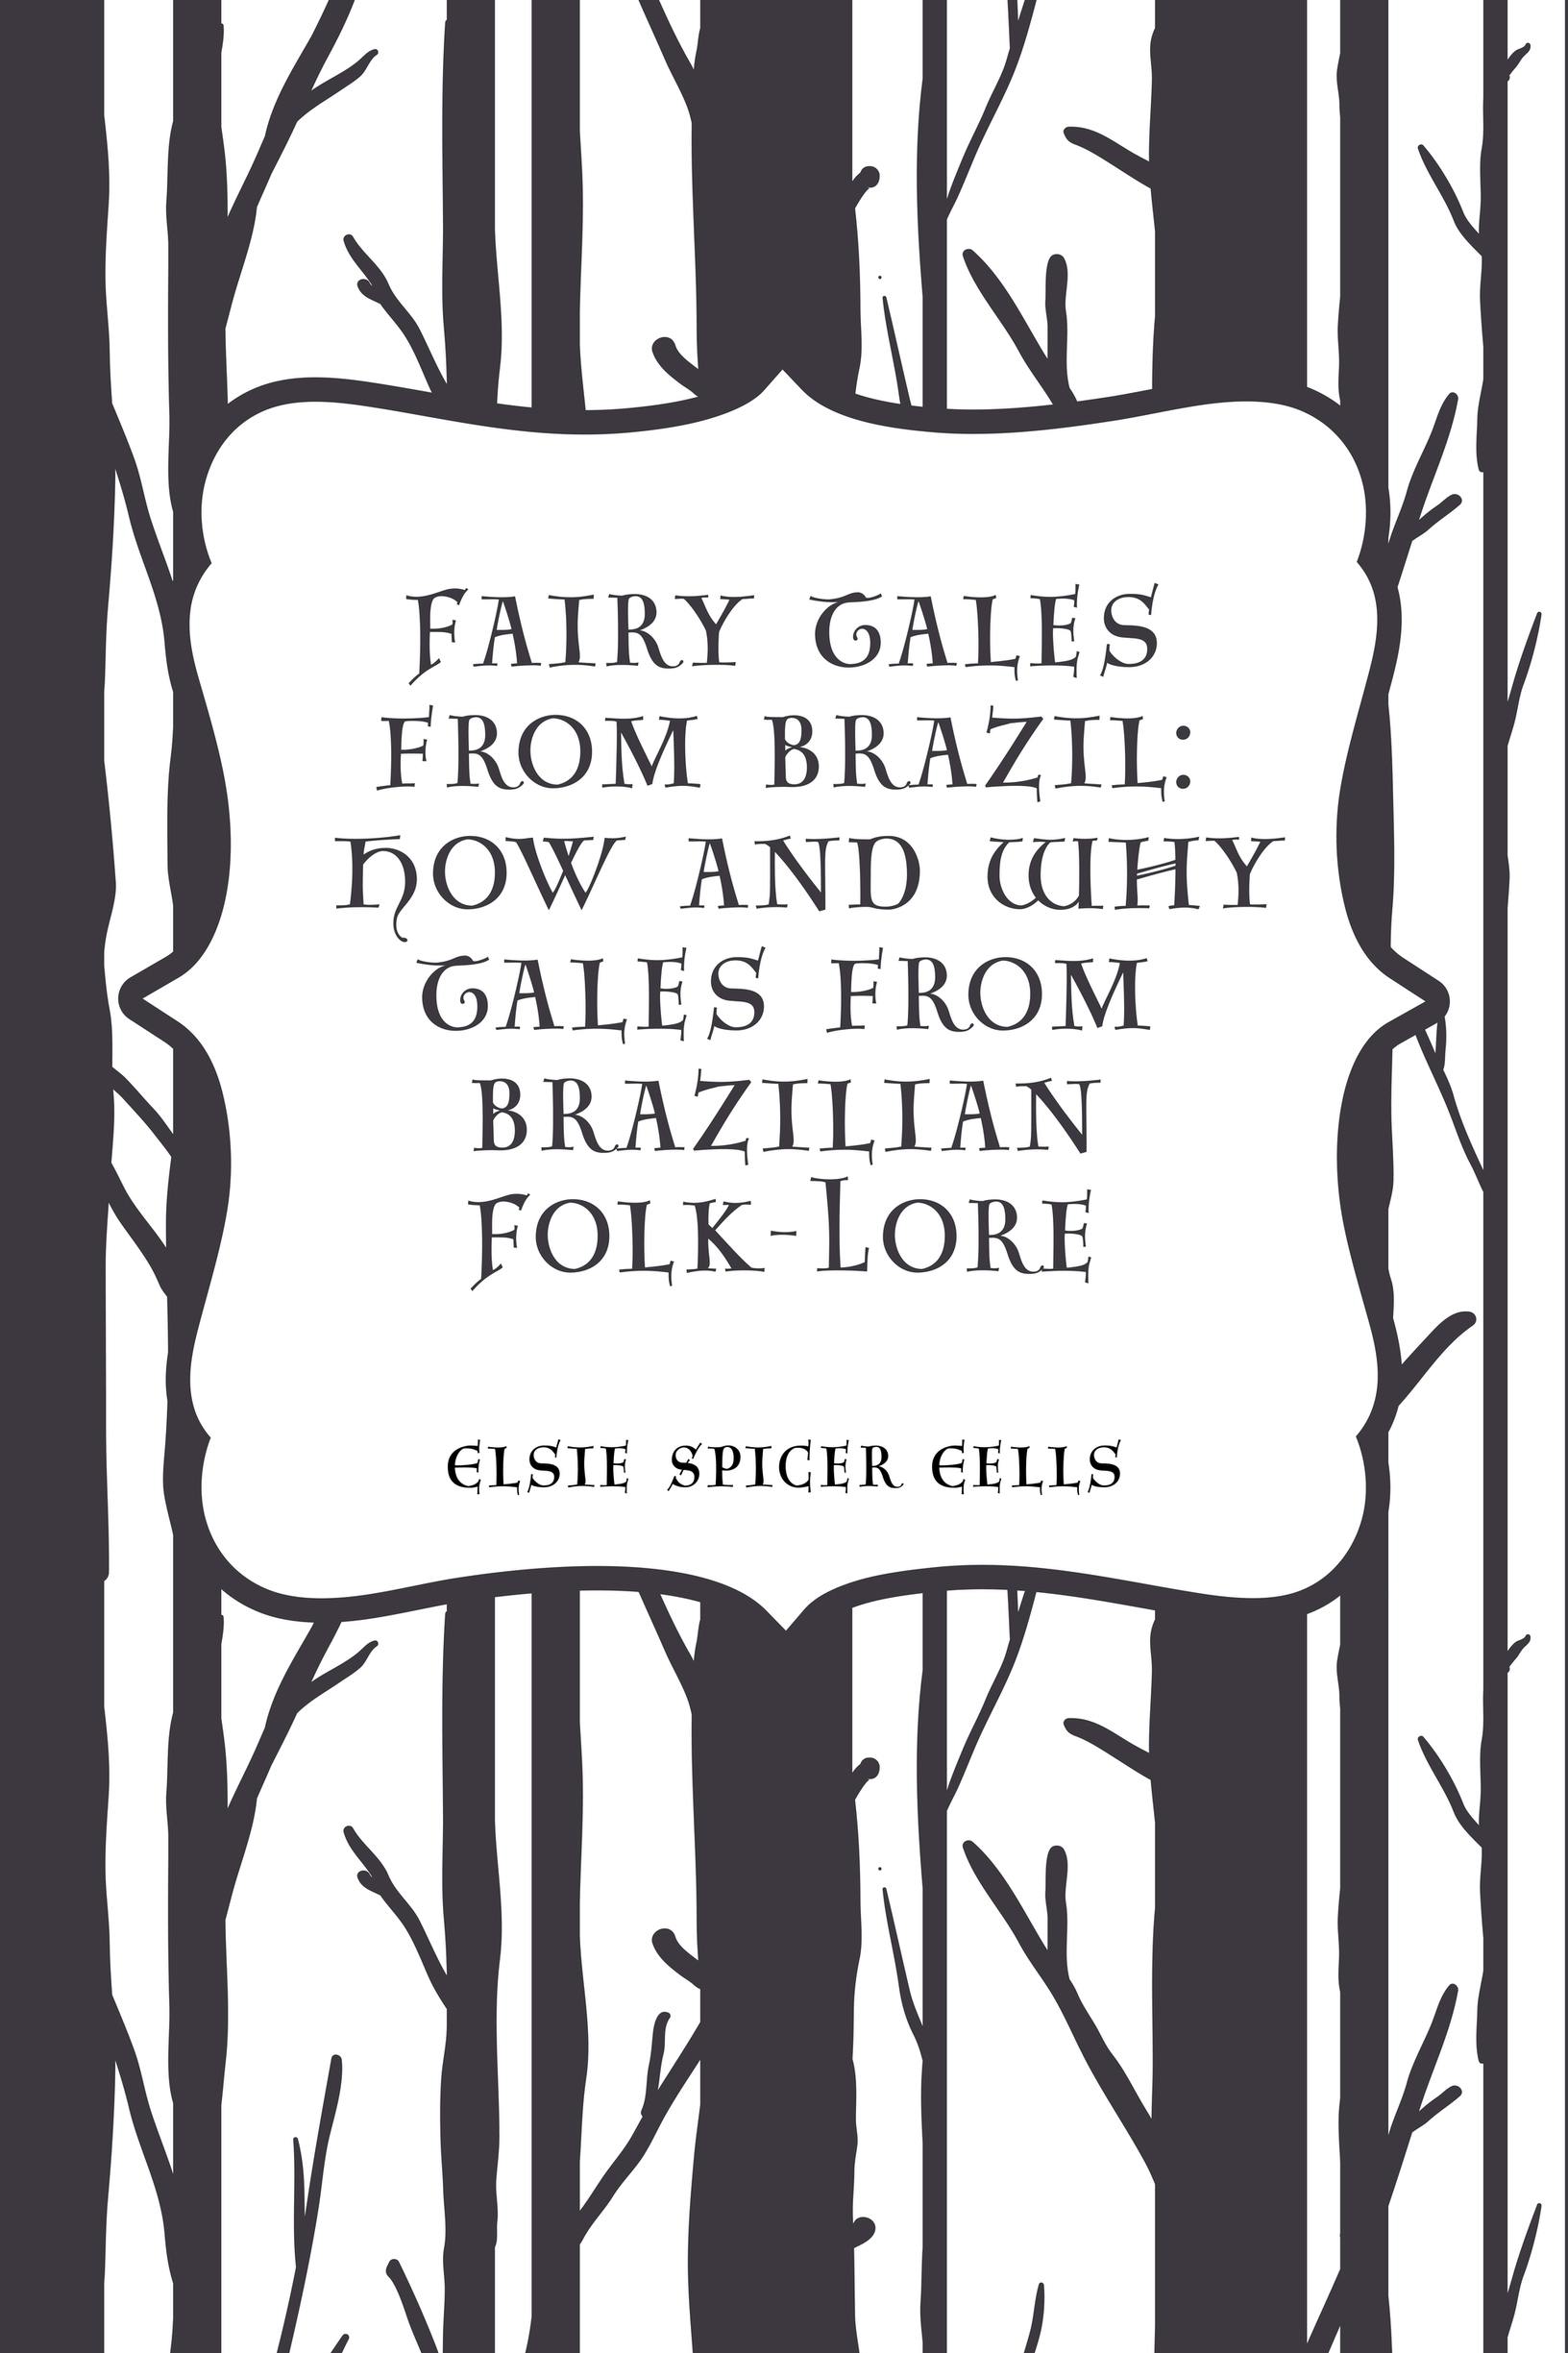 Fairy Tales From Brazil: How And Why Tales From Brazilian Folk-Lore, E-book, Elsie Spicer Eells